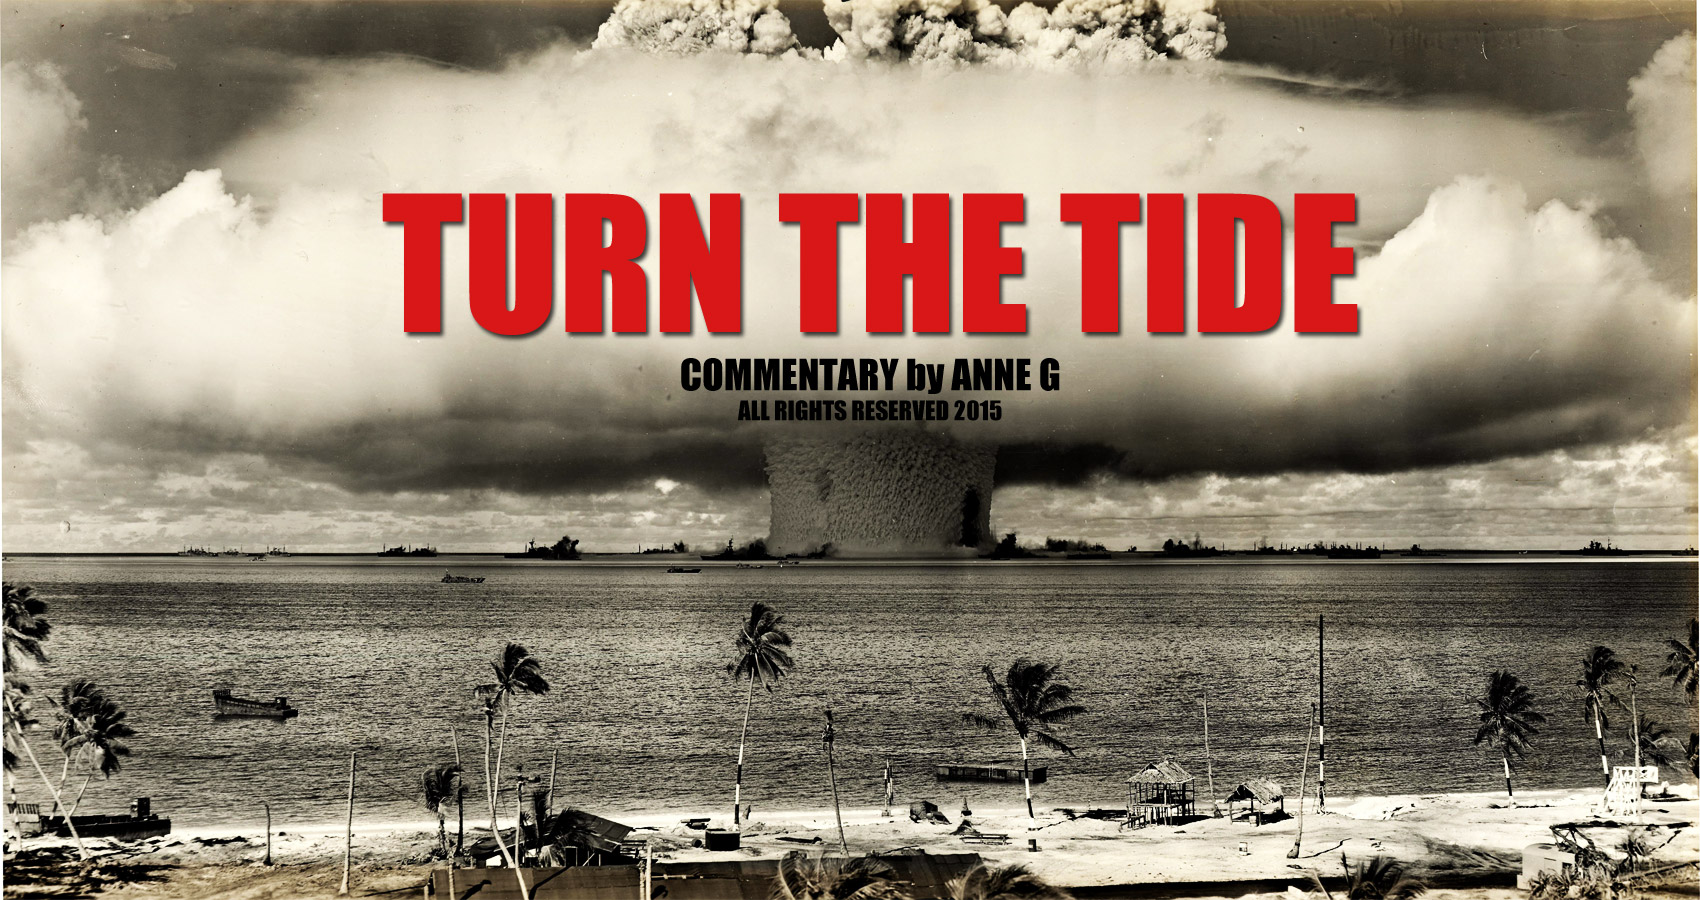 Turn The Tide at spillwords.com by Anne G